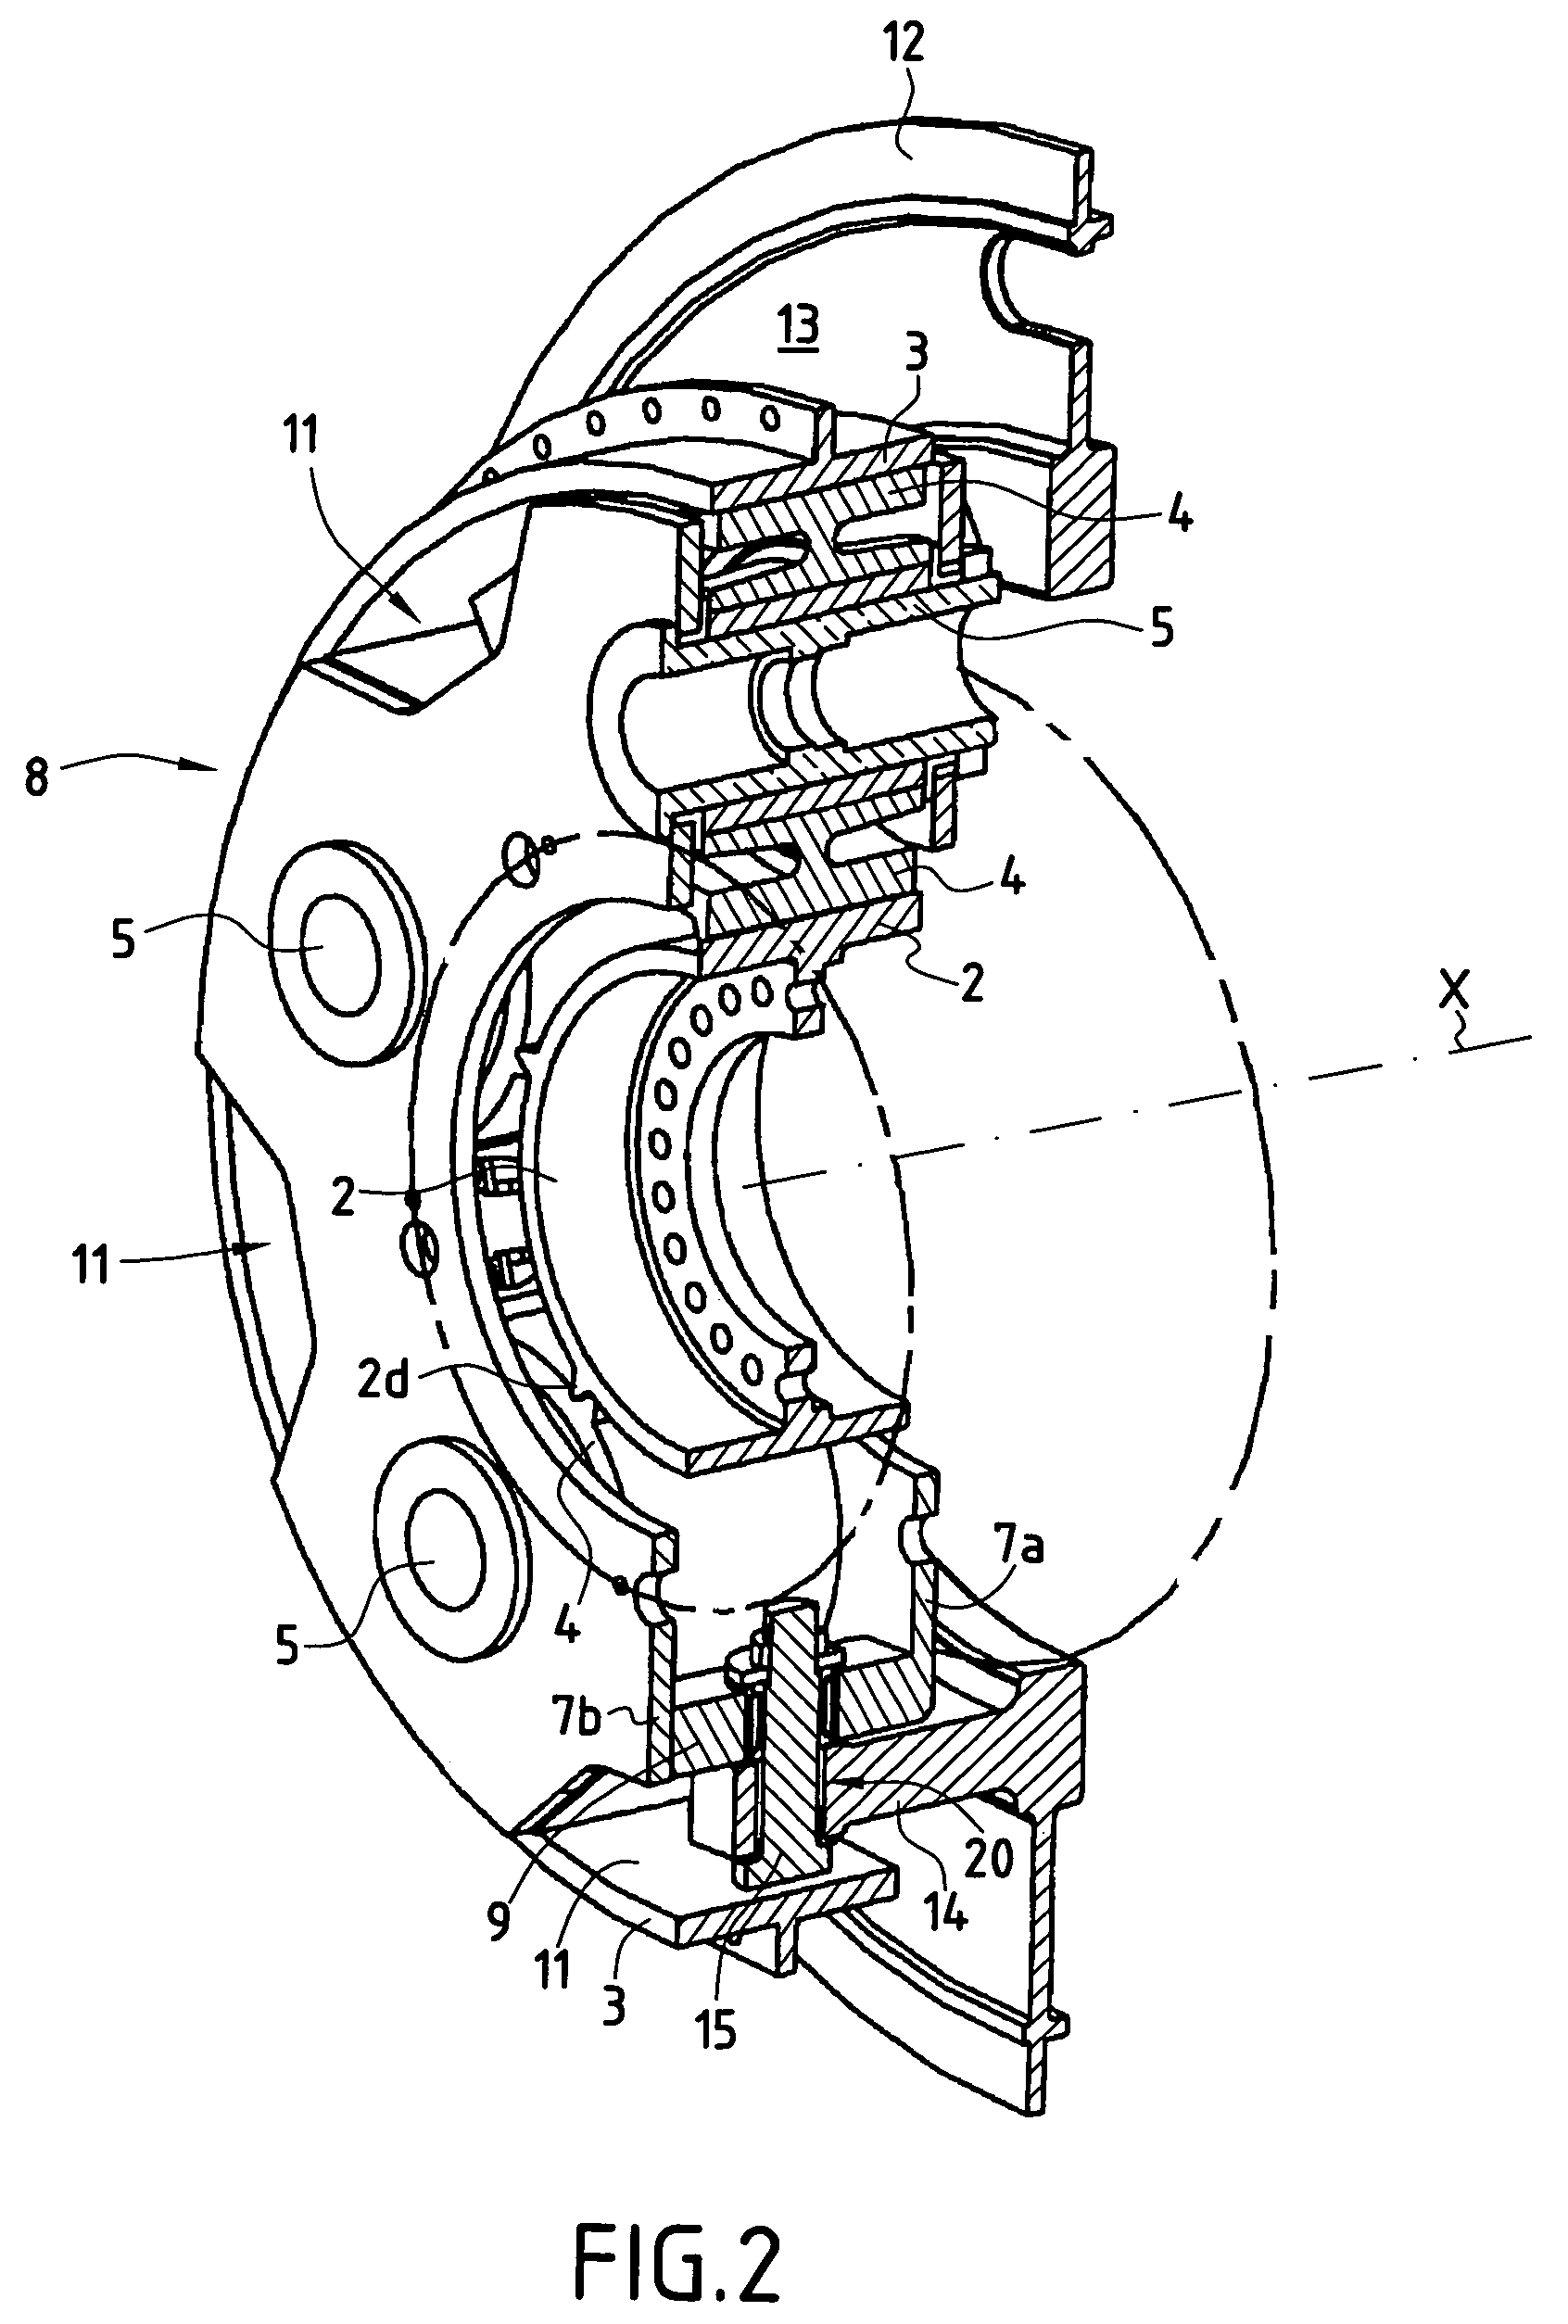 Flexible connection system between a planet carrier and the stationary support in a speed reduction gear train